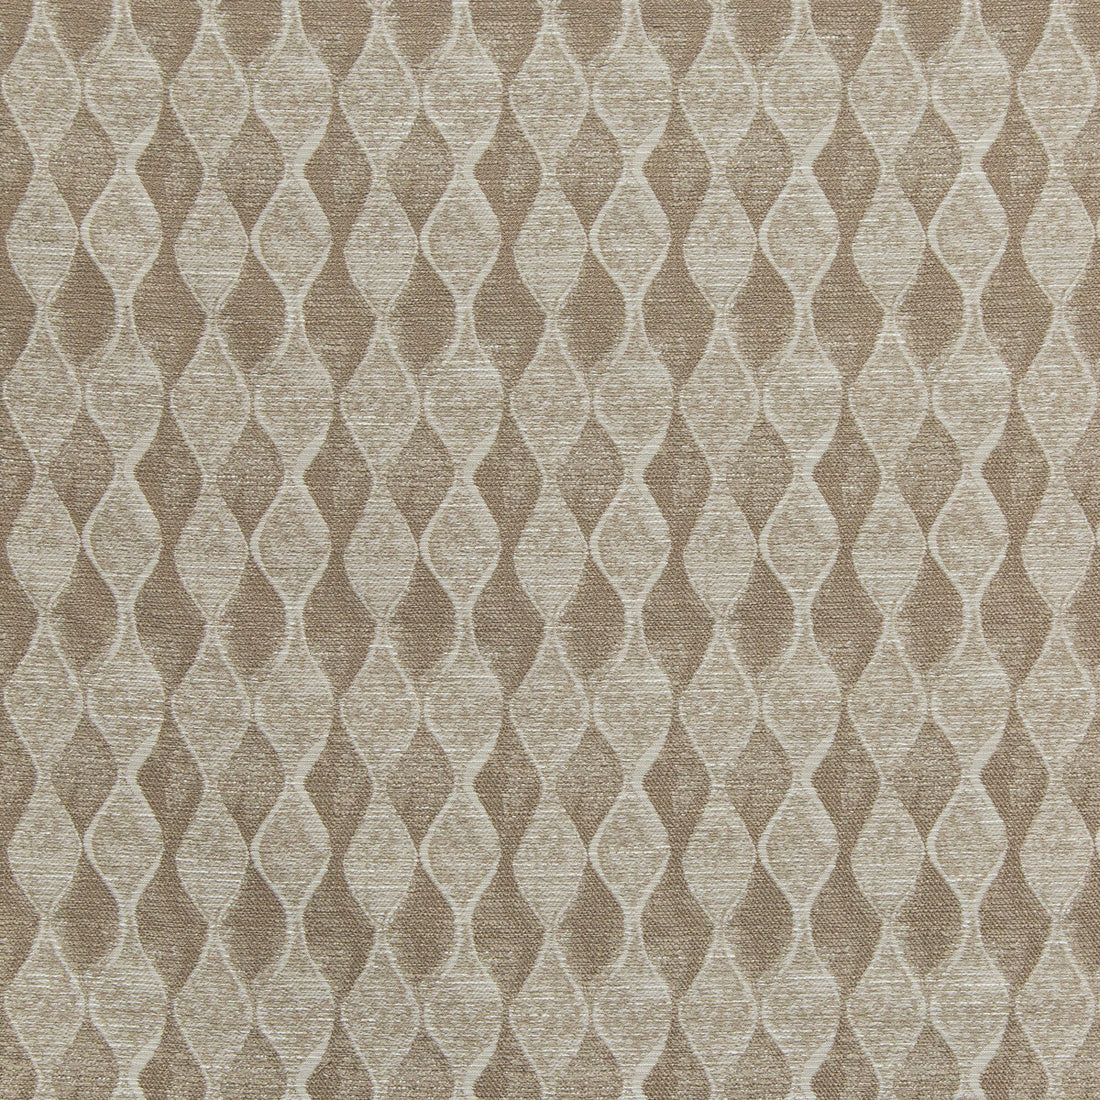 Baja Bound fabric in dune color - pattern 35832.16.0 - by Kravet Design in the Indoor / Outdoor collection